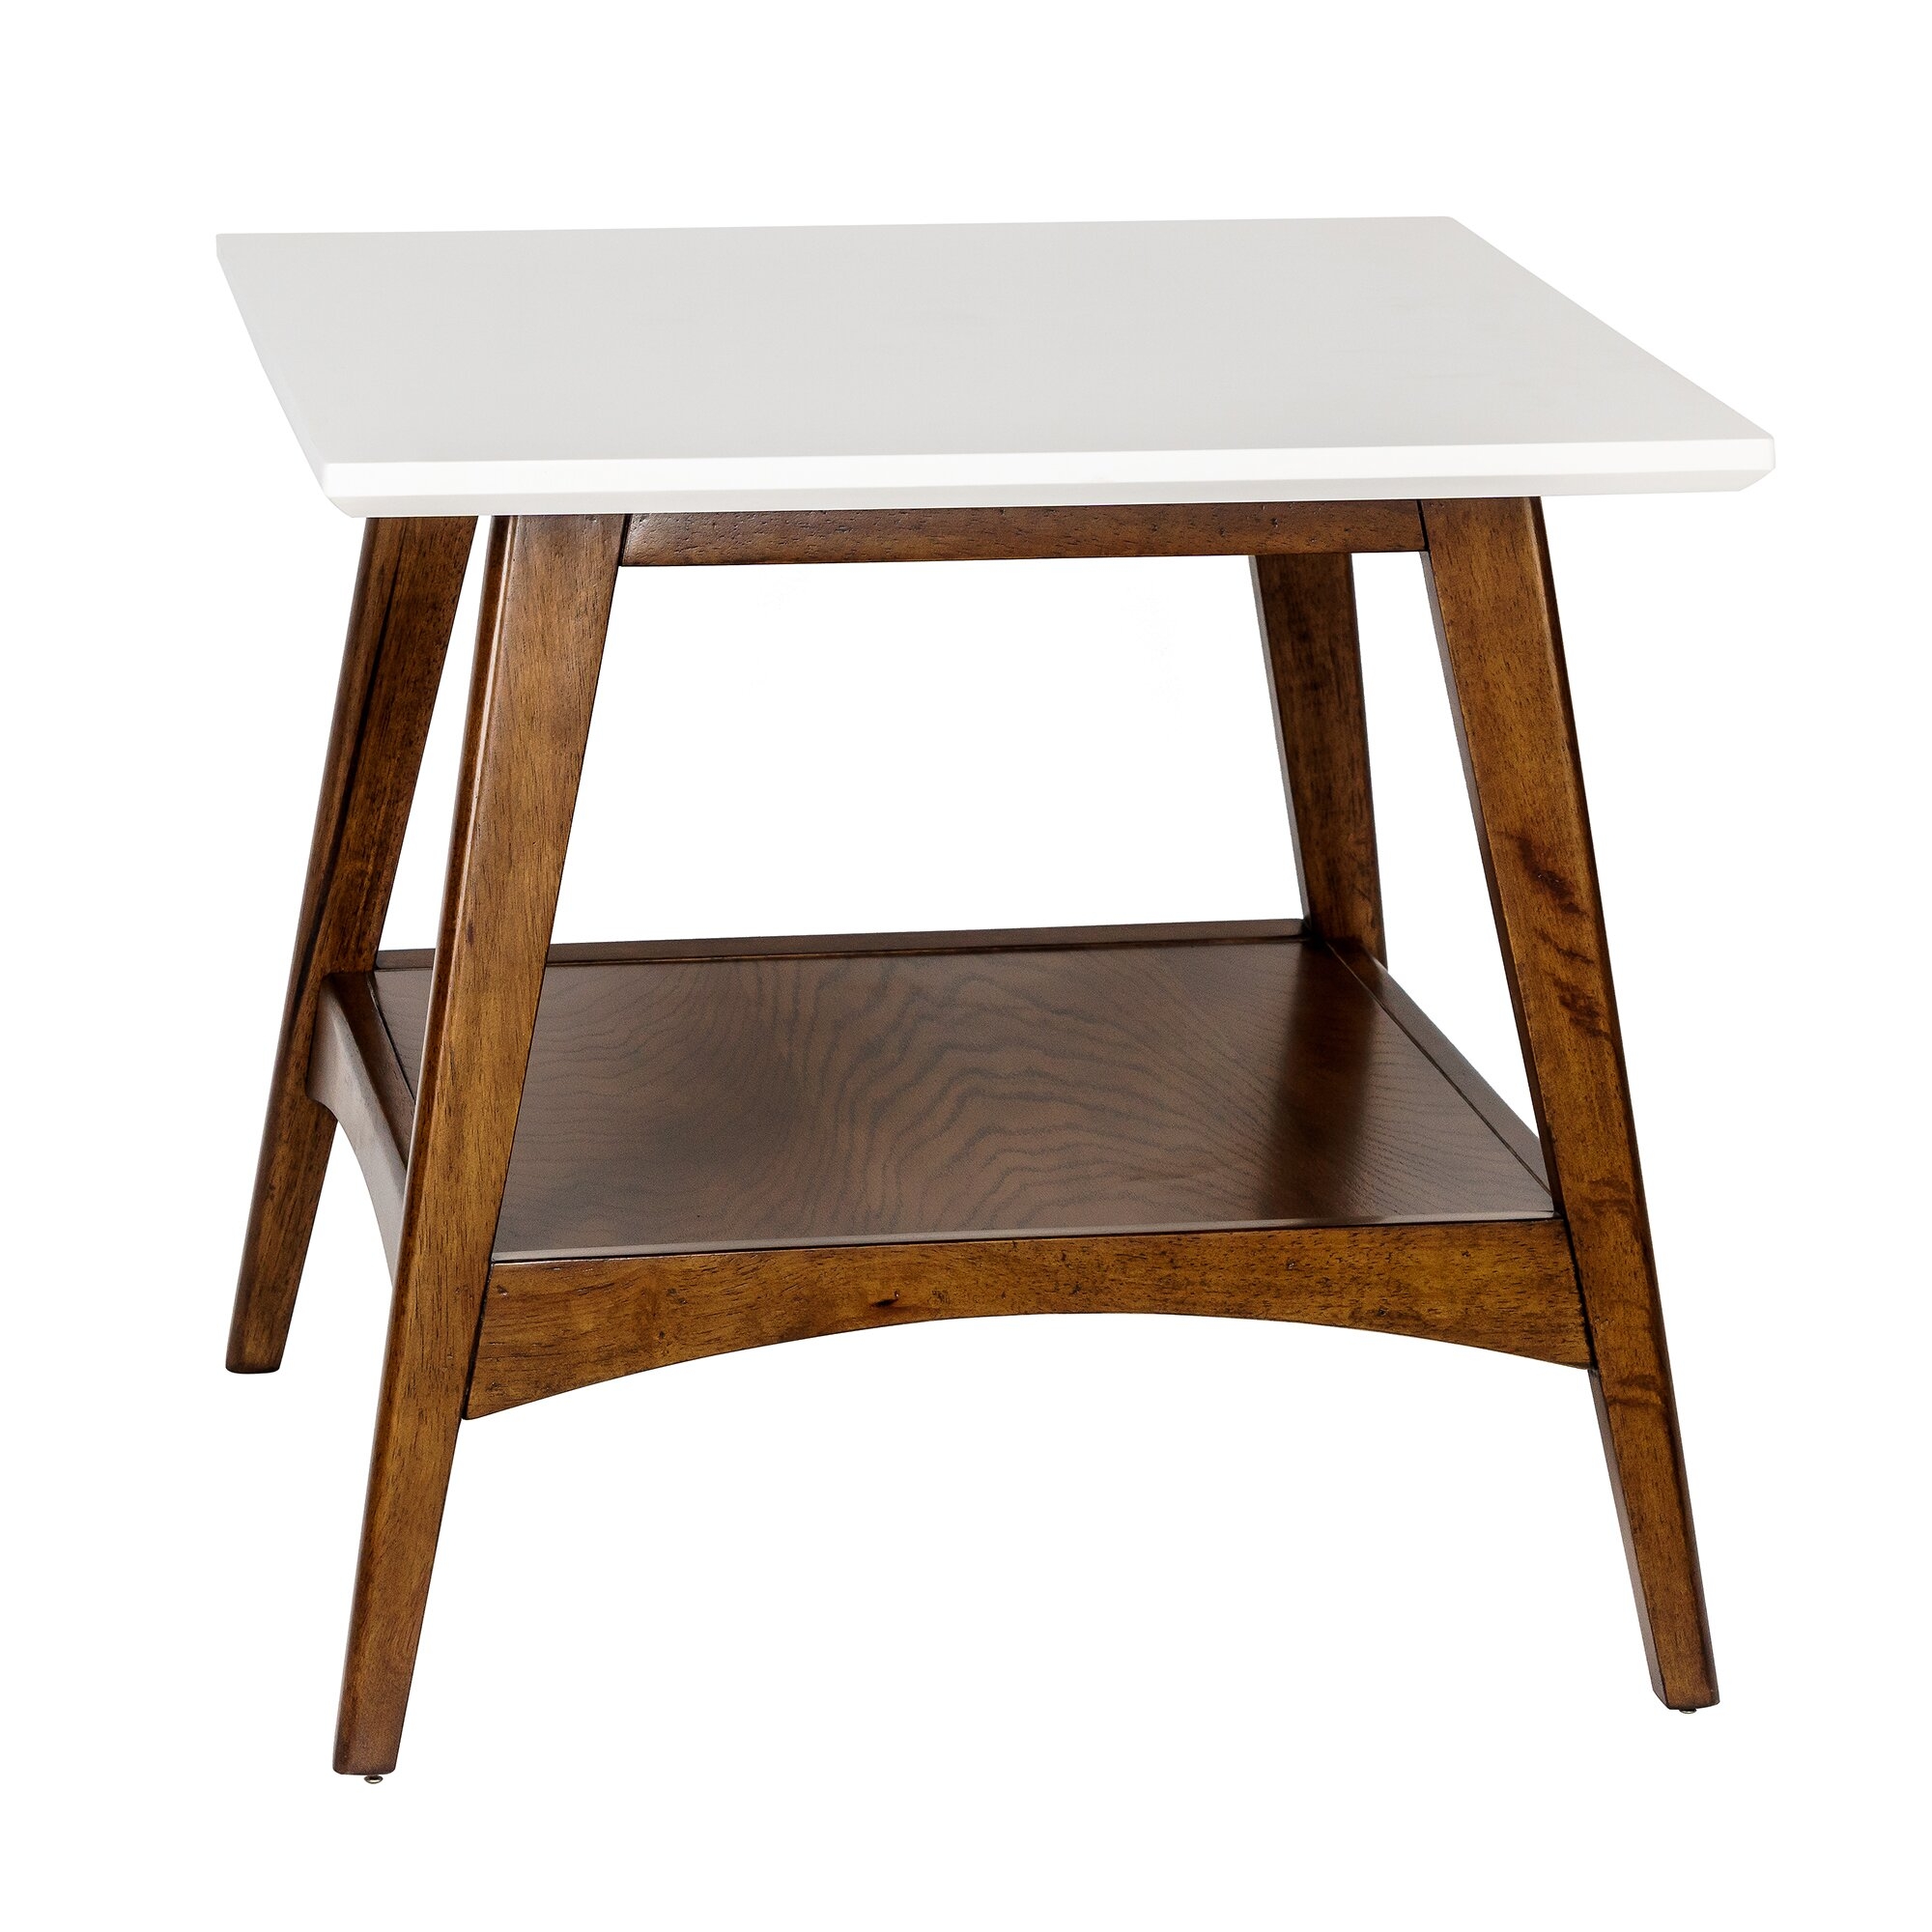 Parker End Table with storage - Image 1